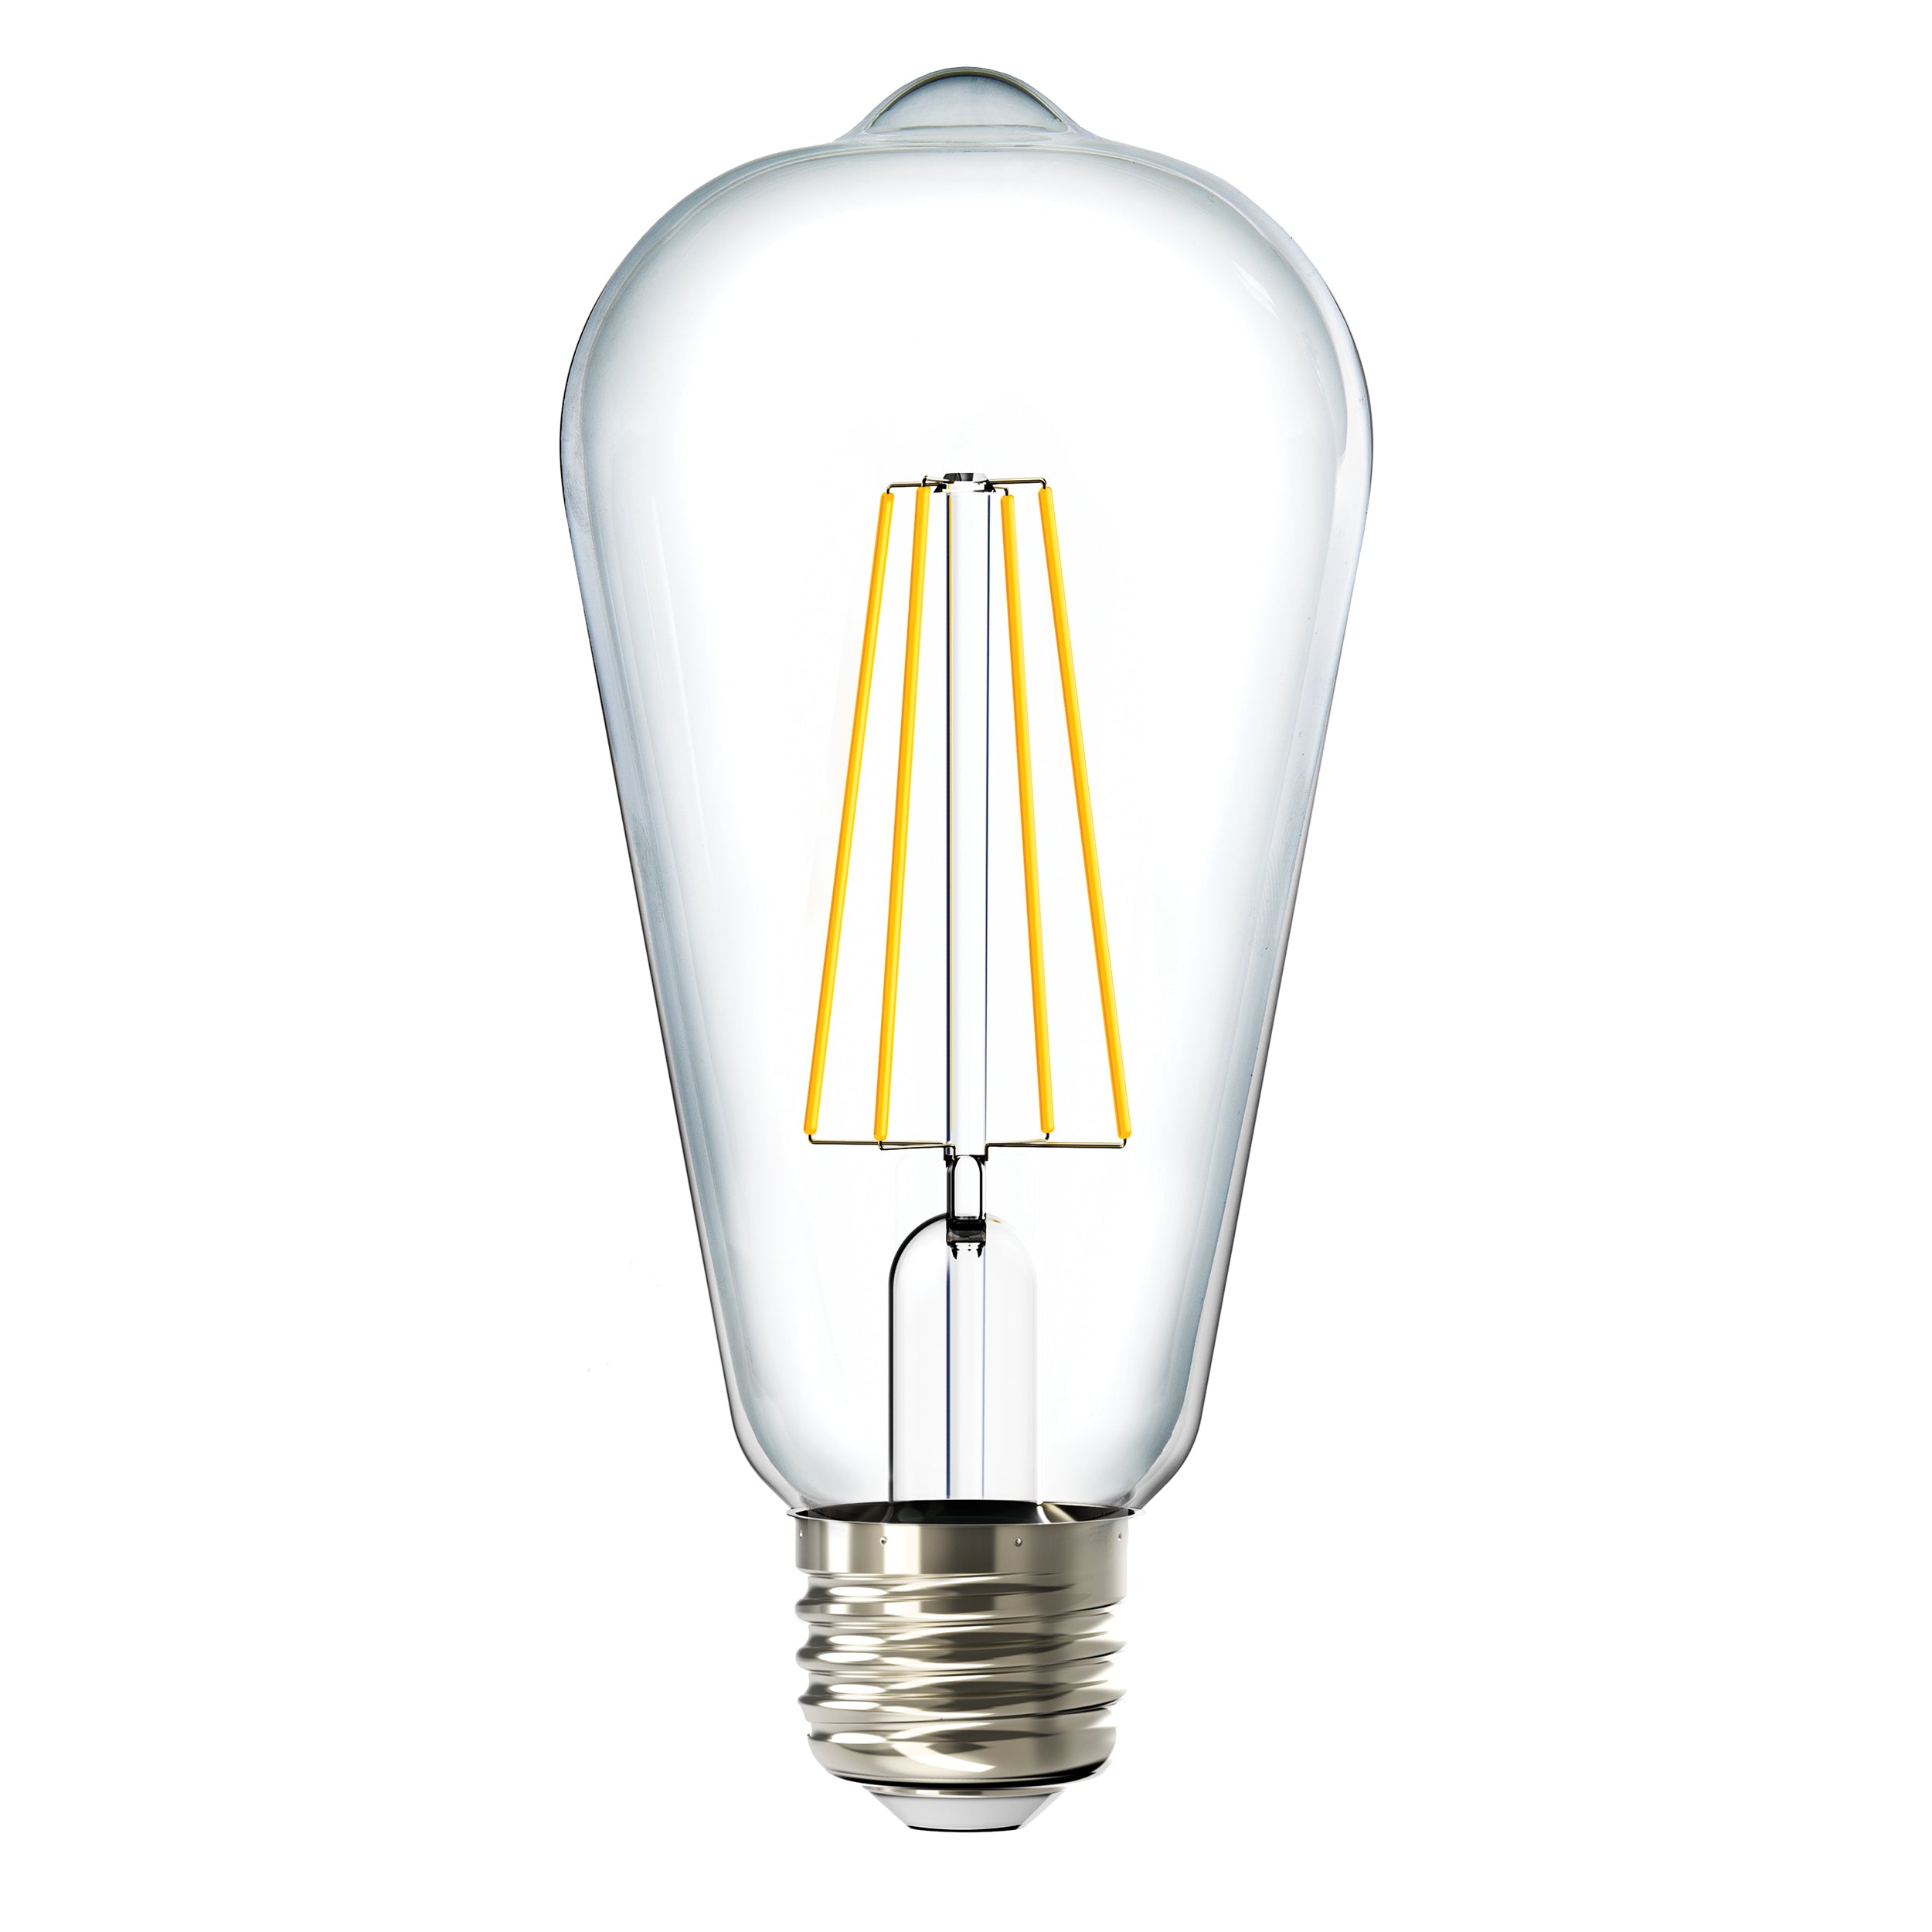 Introduction to E12 and E14 Bulbs and Guide to Correct Selection